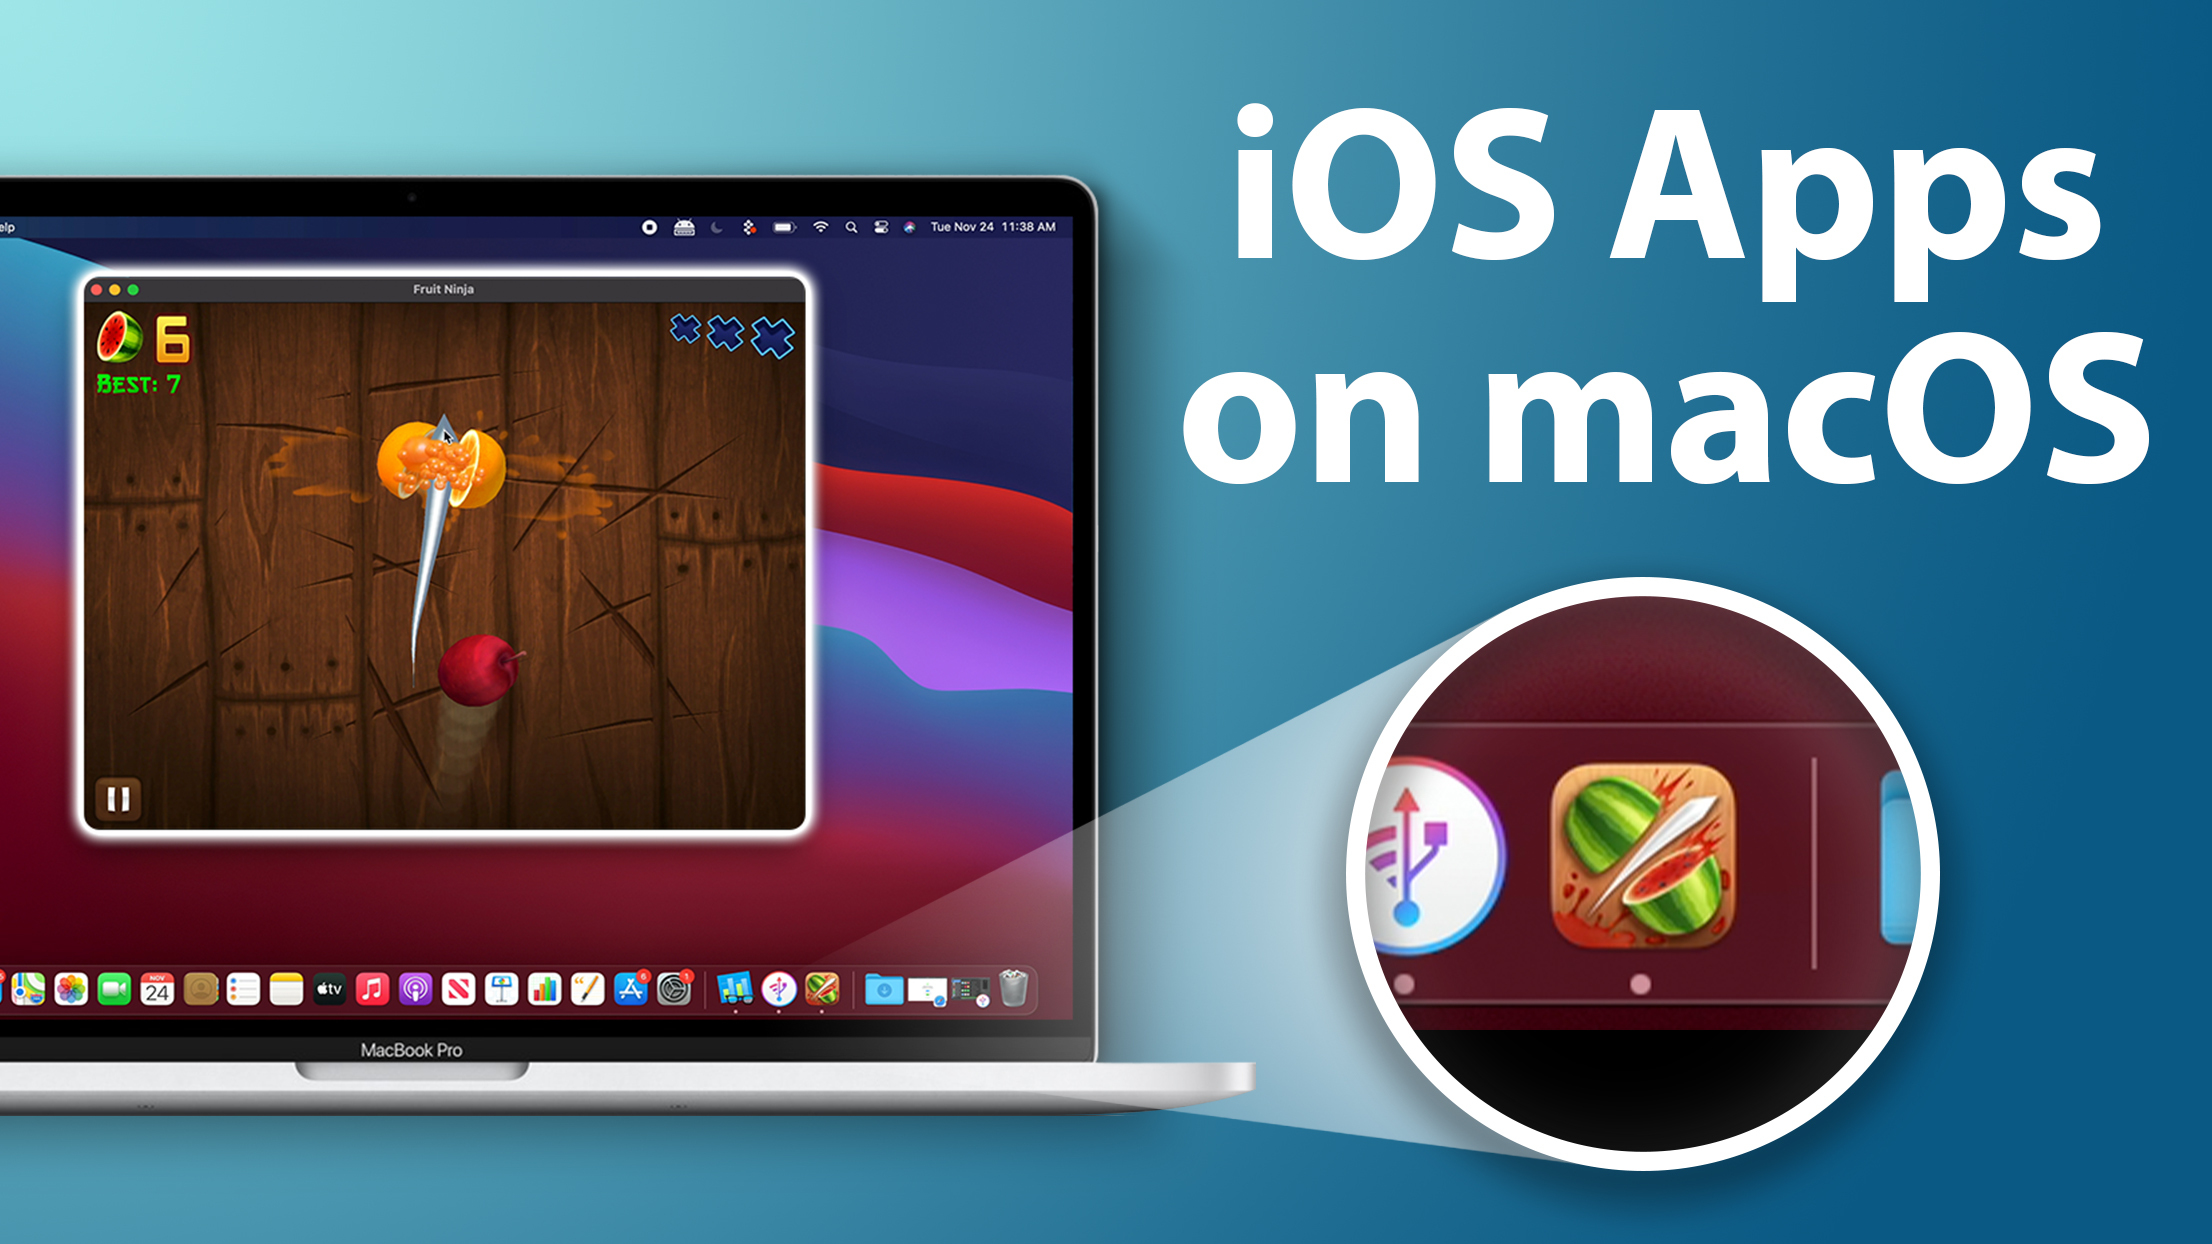 anydesk app download for mac os 109